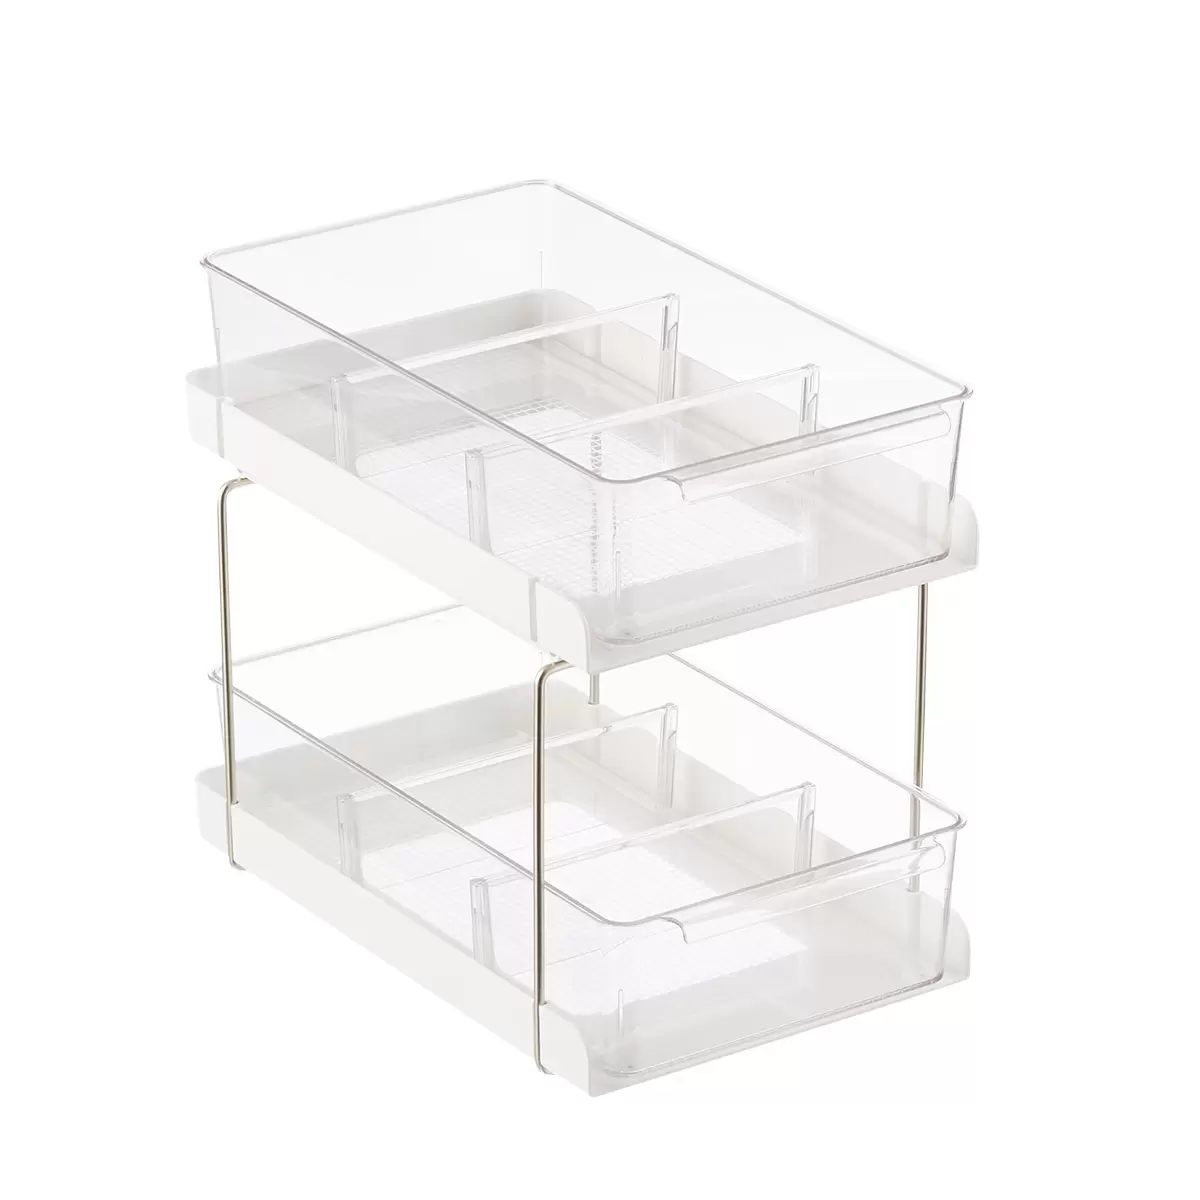 https://www.containerstore.com/catalogimages/415267/10083349-two-drawer-cabinet-organize.jpg